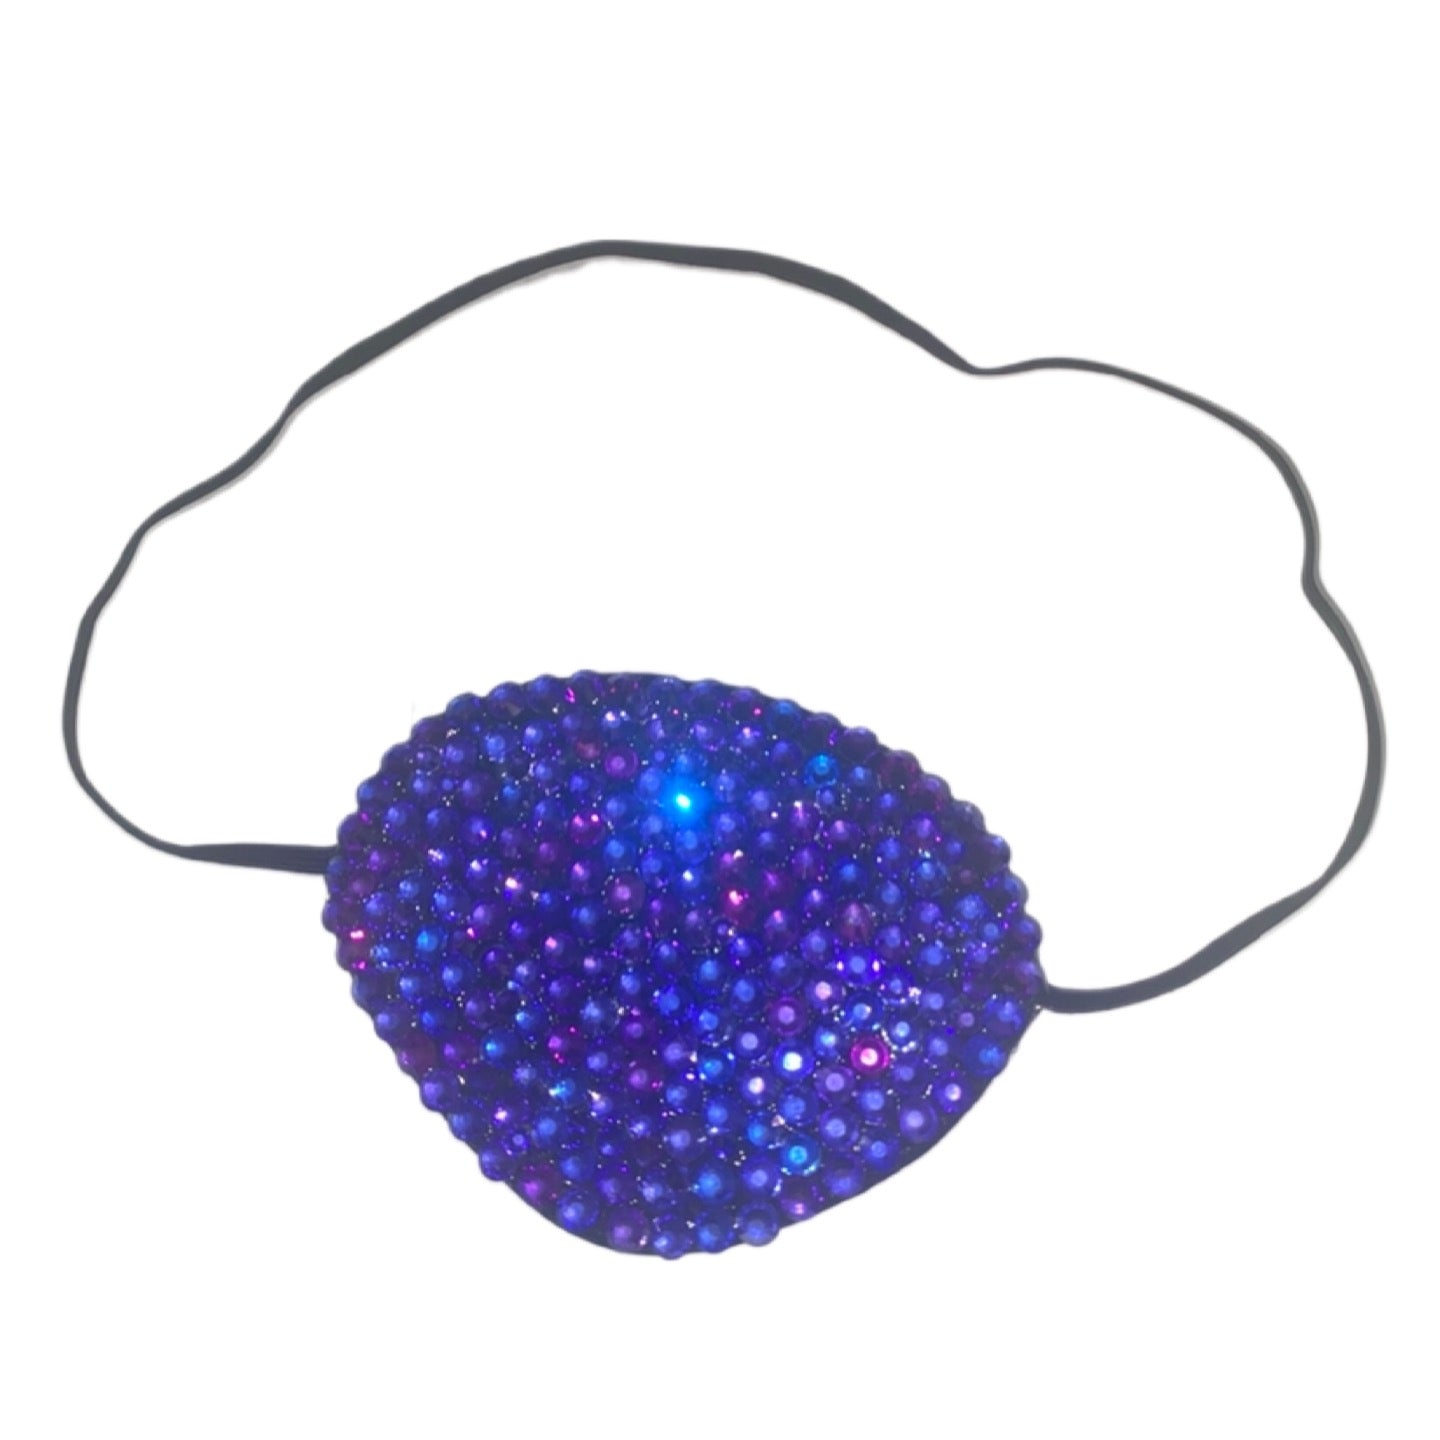 Black Eye Patch Bedazzled In Cadbury Purple Luxe Crystal